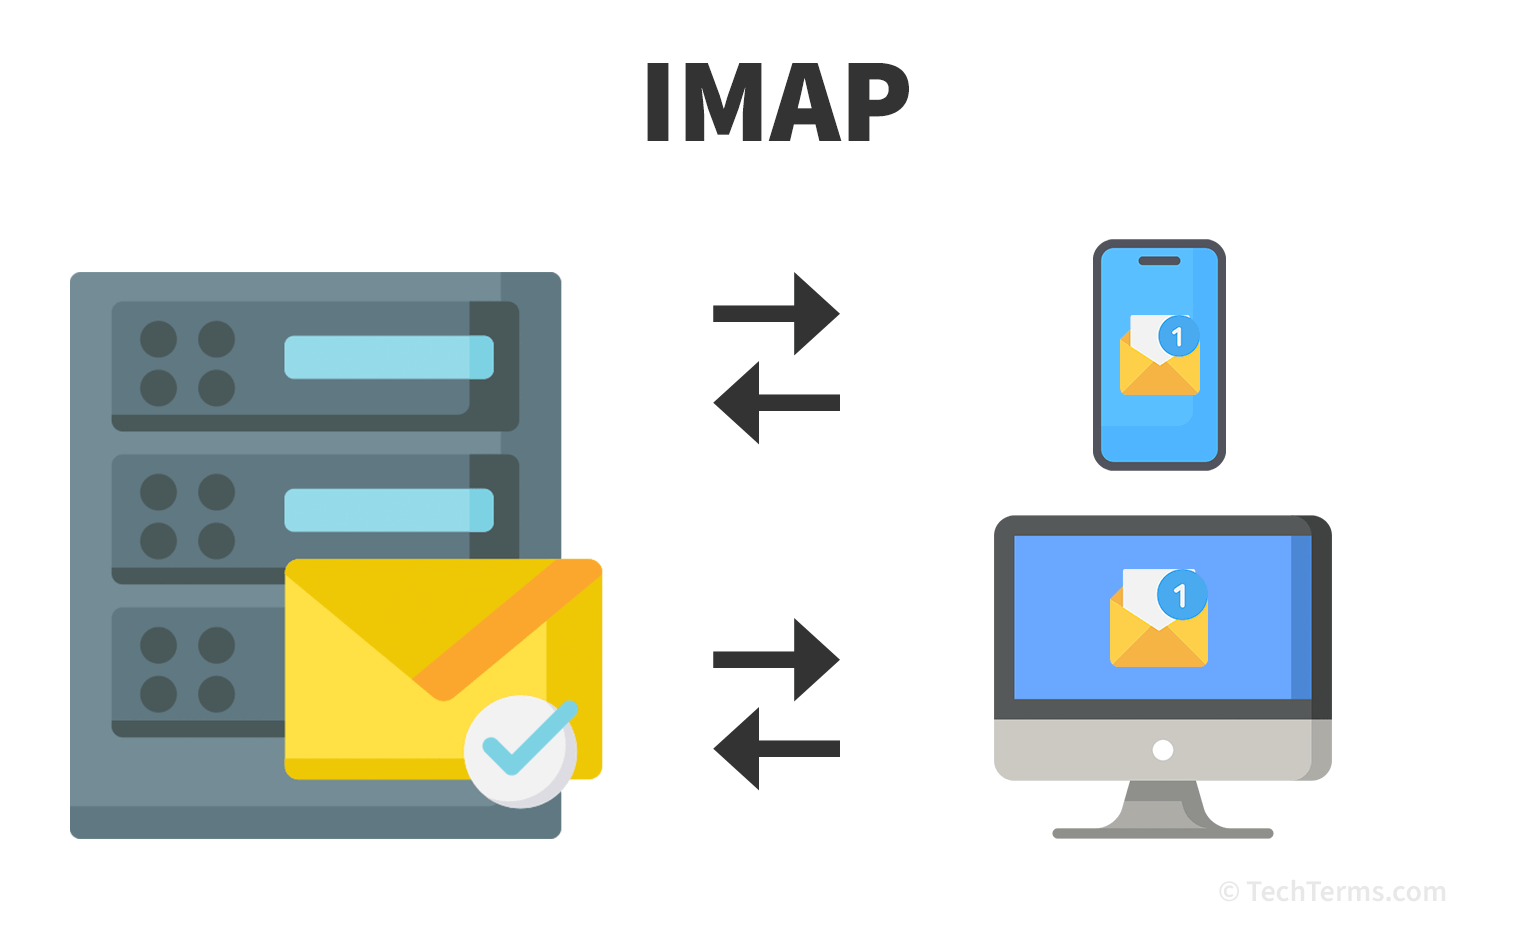 IMAP syncs messages between the mail server and multiple devices